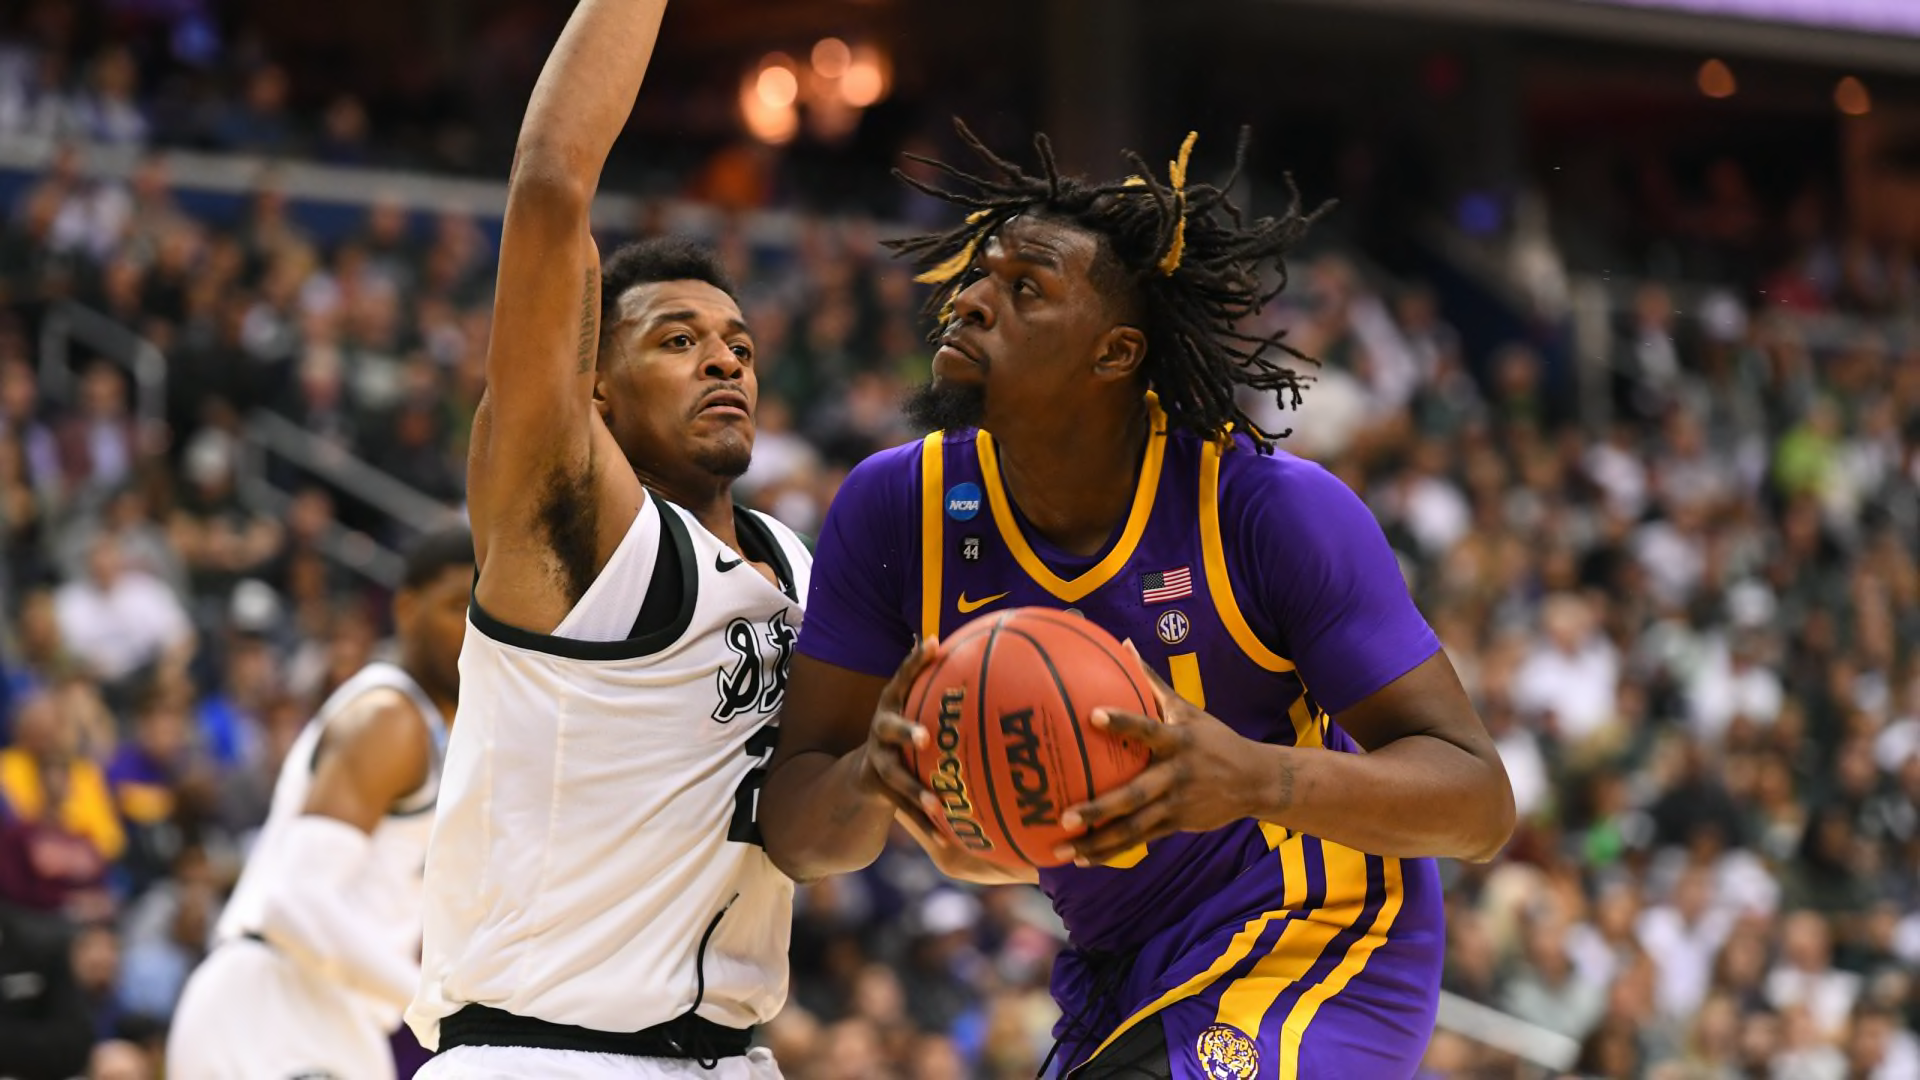 Minnesota Timberwolves sign promising young center Naz Reid to a two